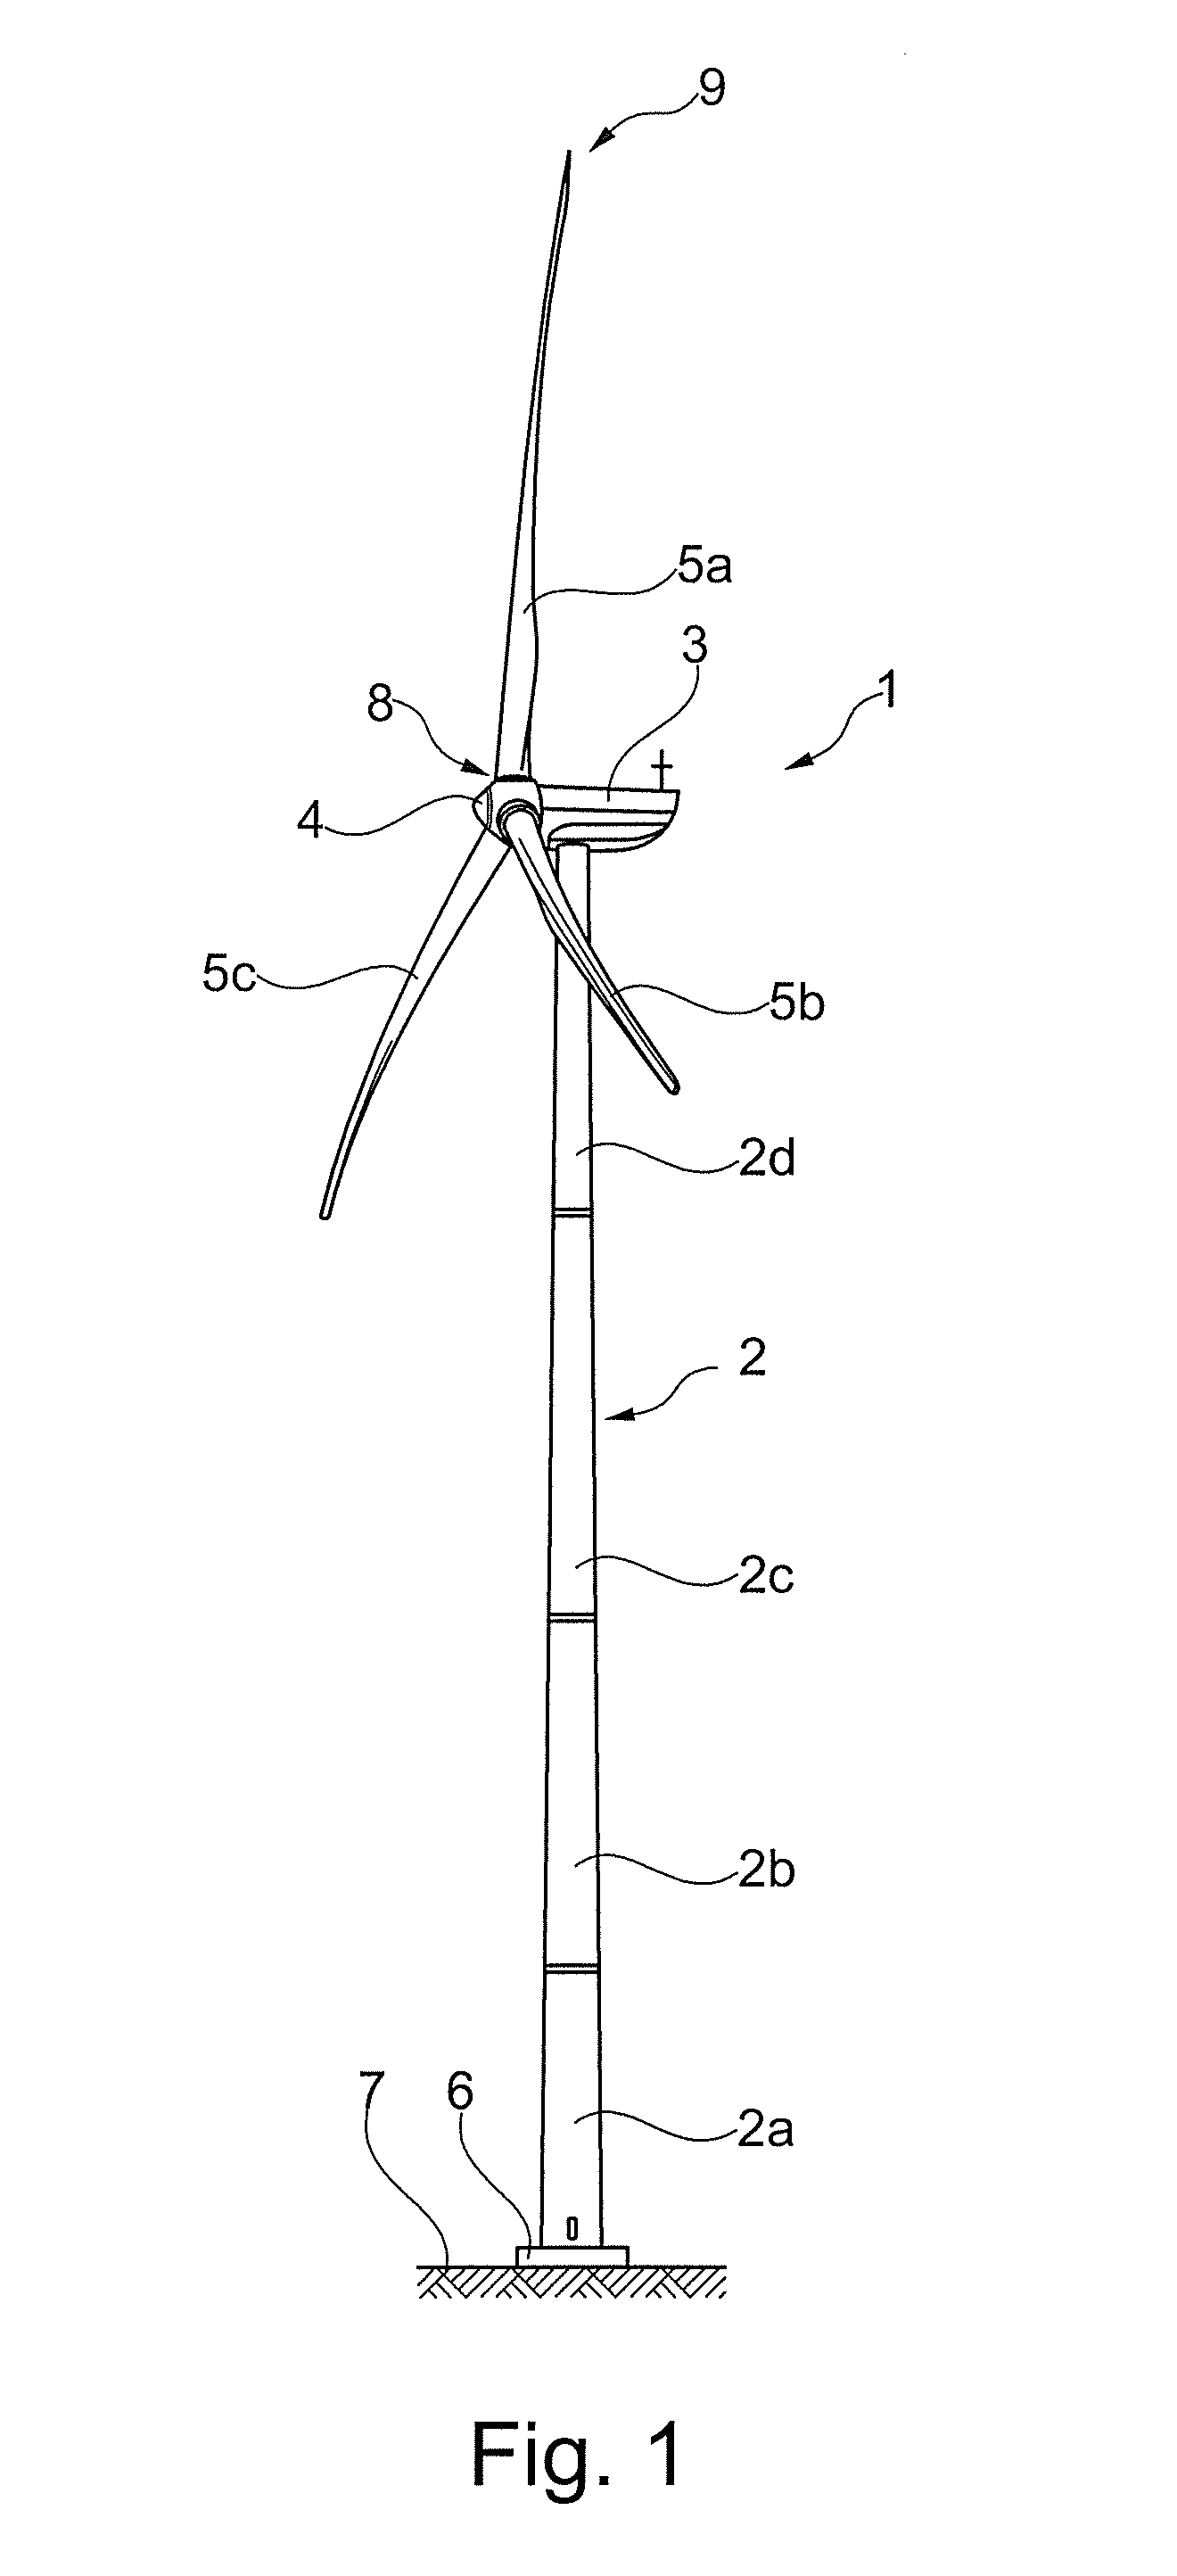 Unit for rotating cable spacing plates in a wind turbine tower